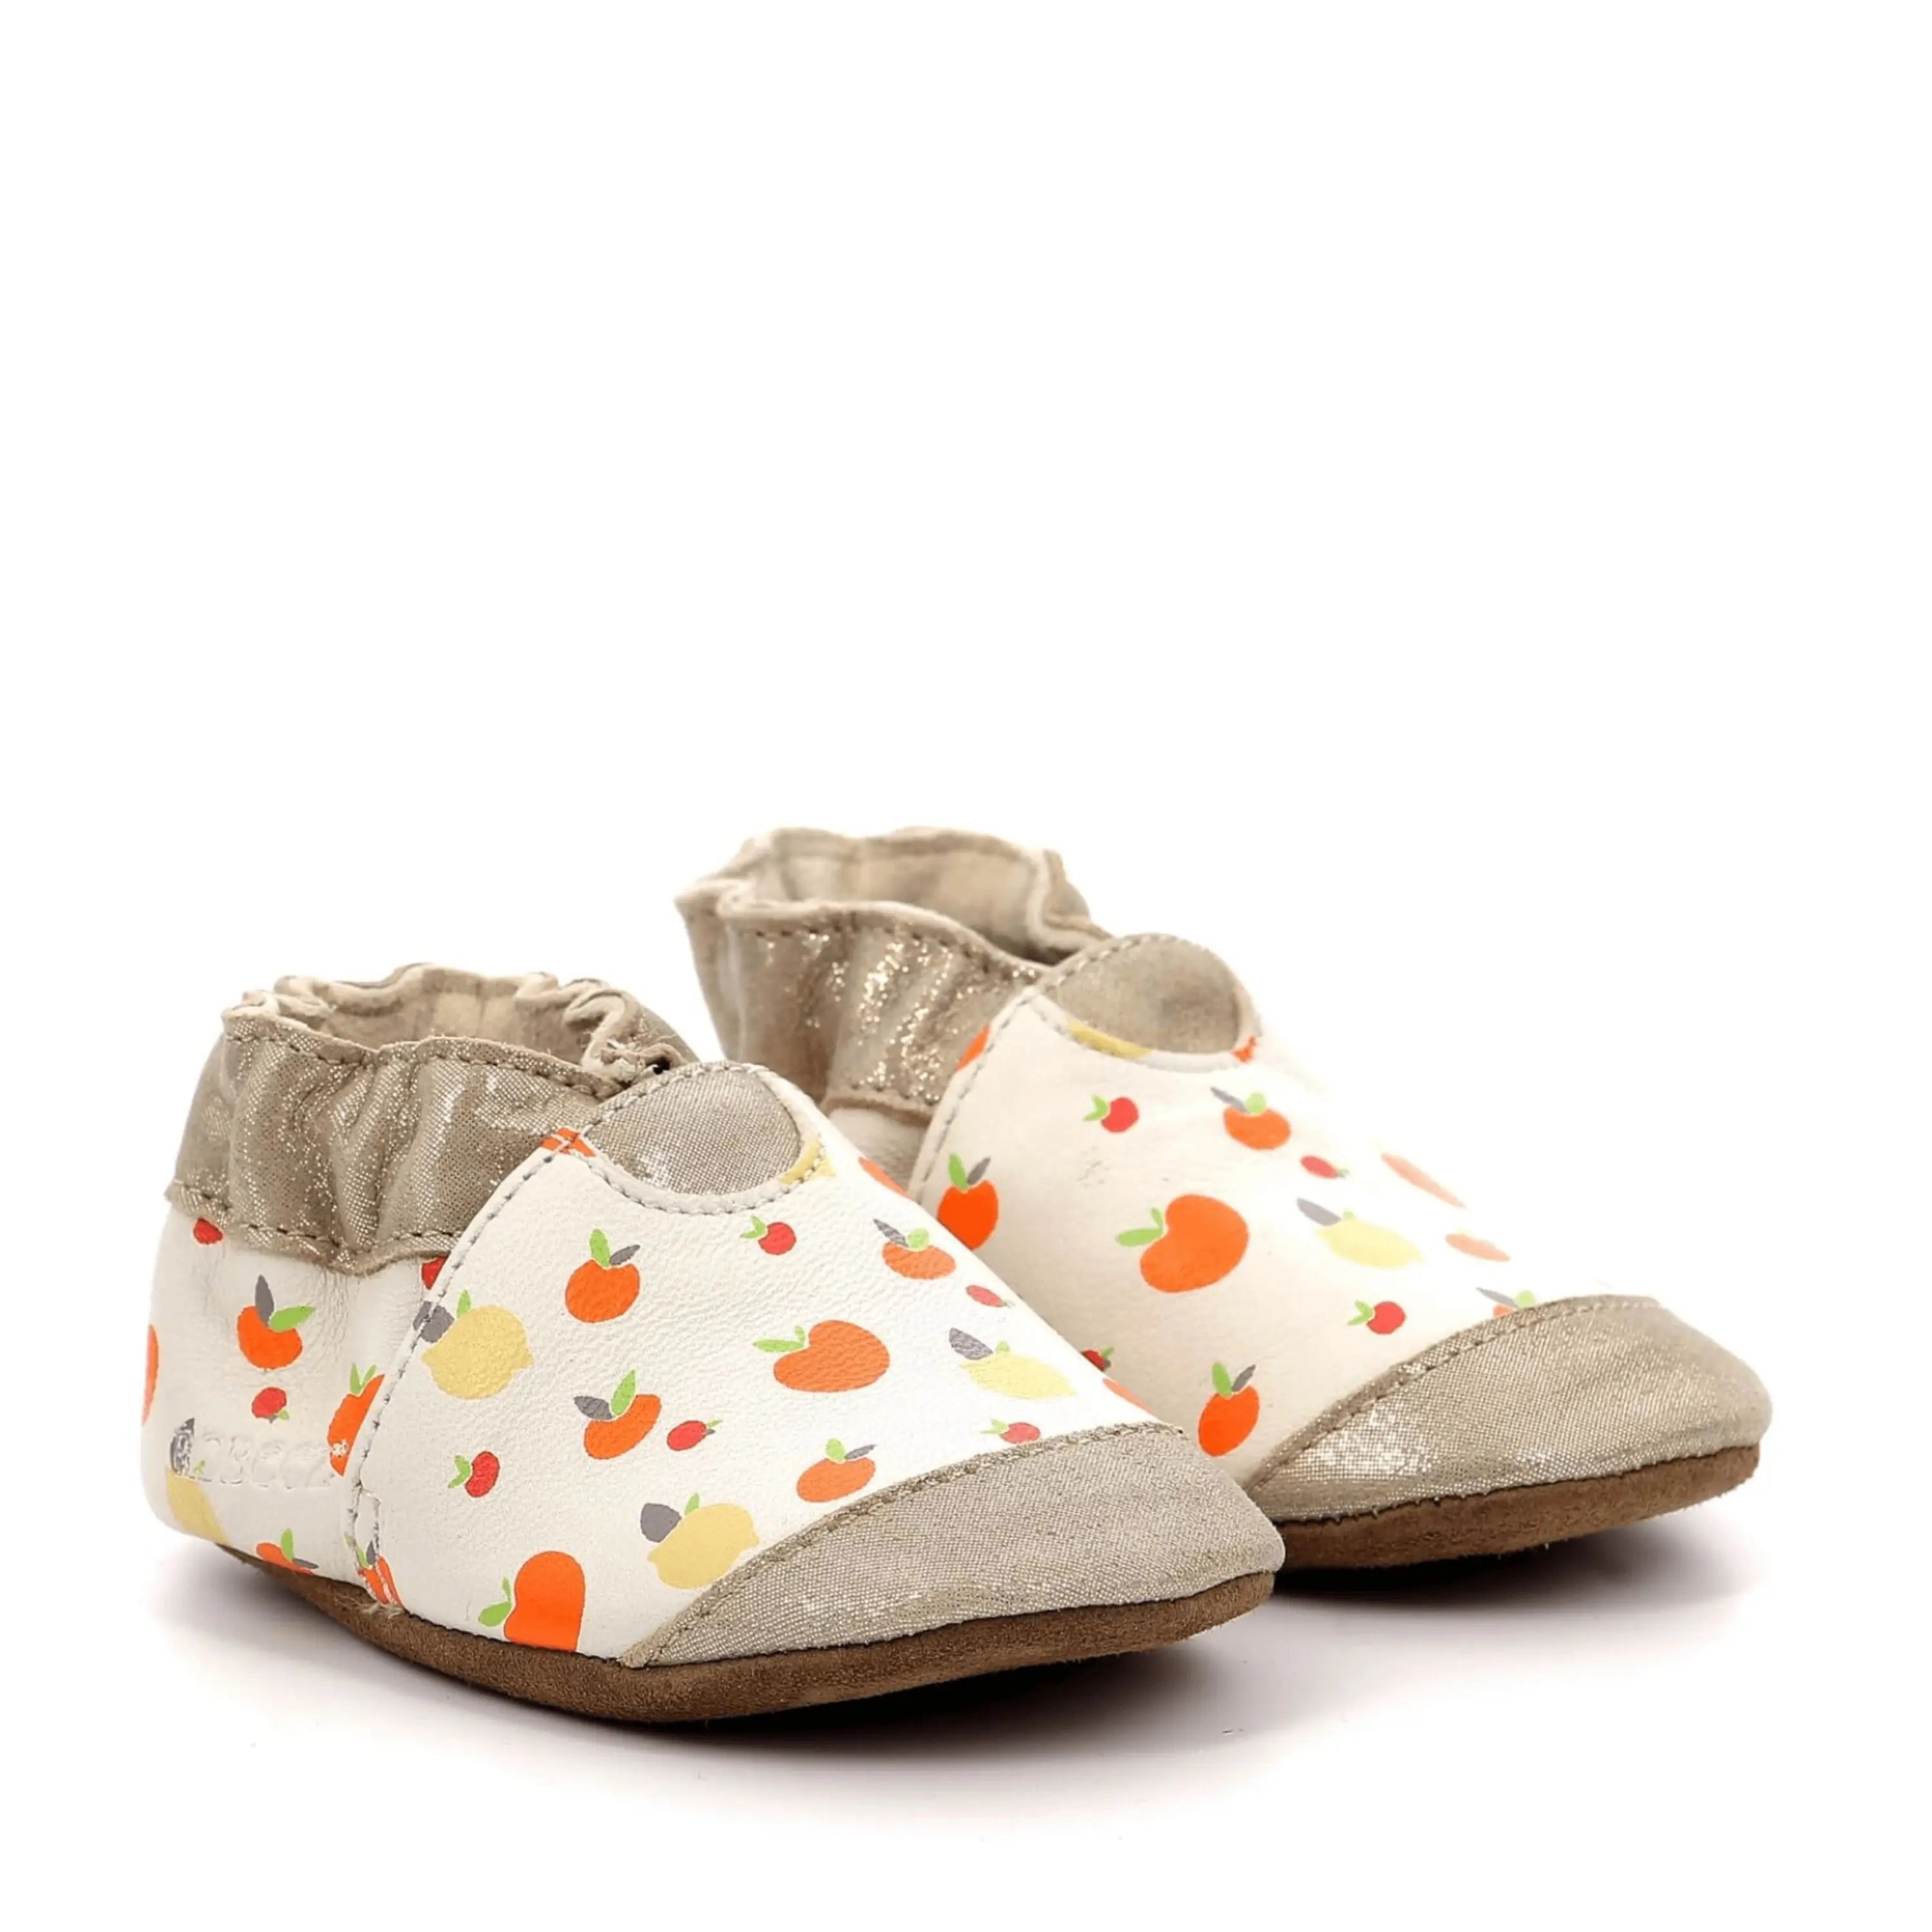 ROBEEZ Chaussons Summer Juice Or Beige ma petite pointure